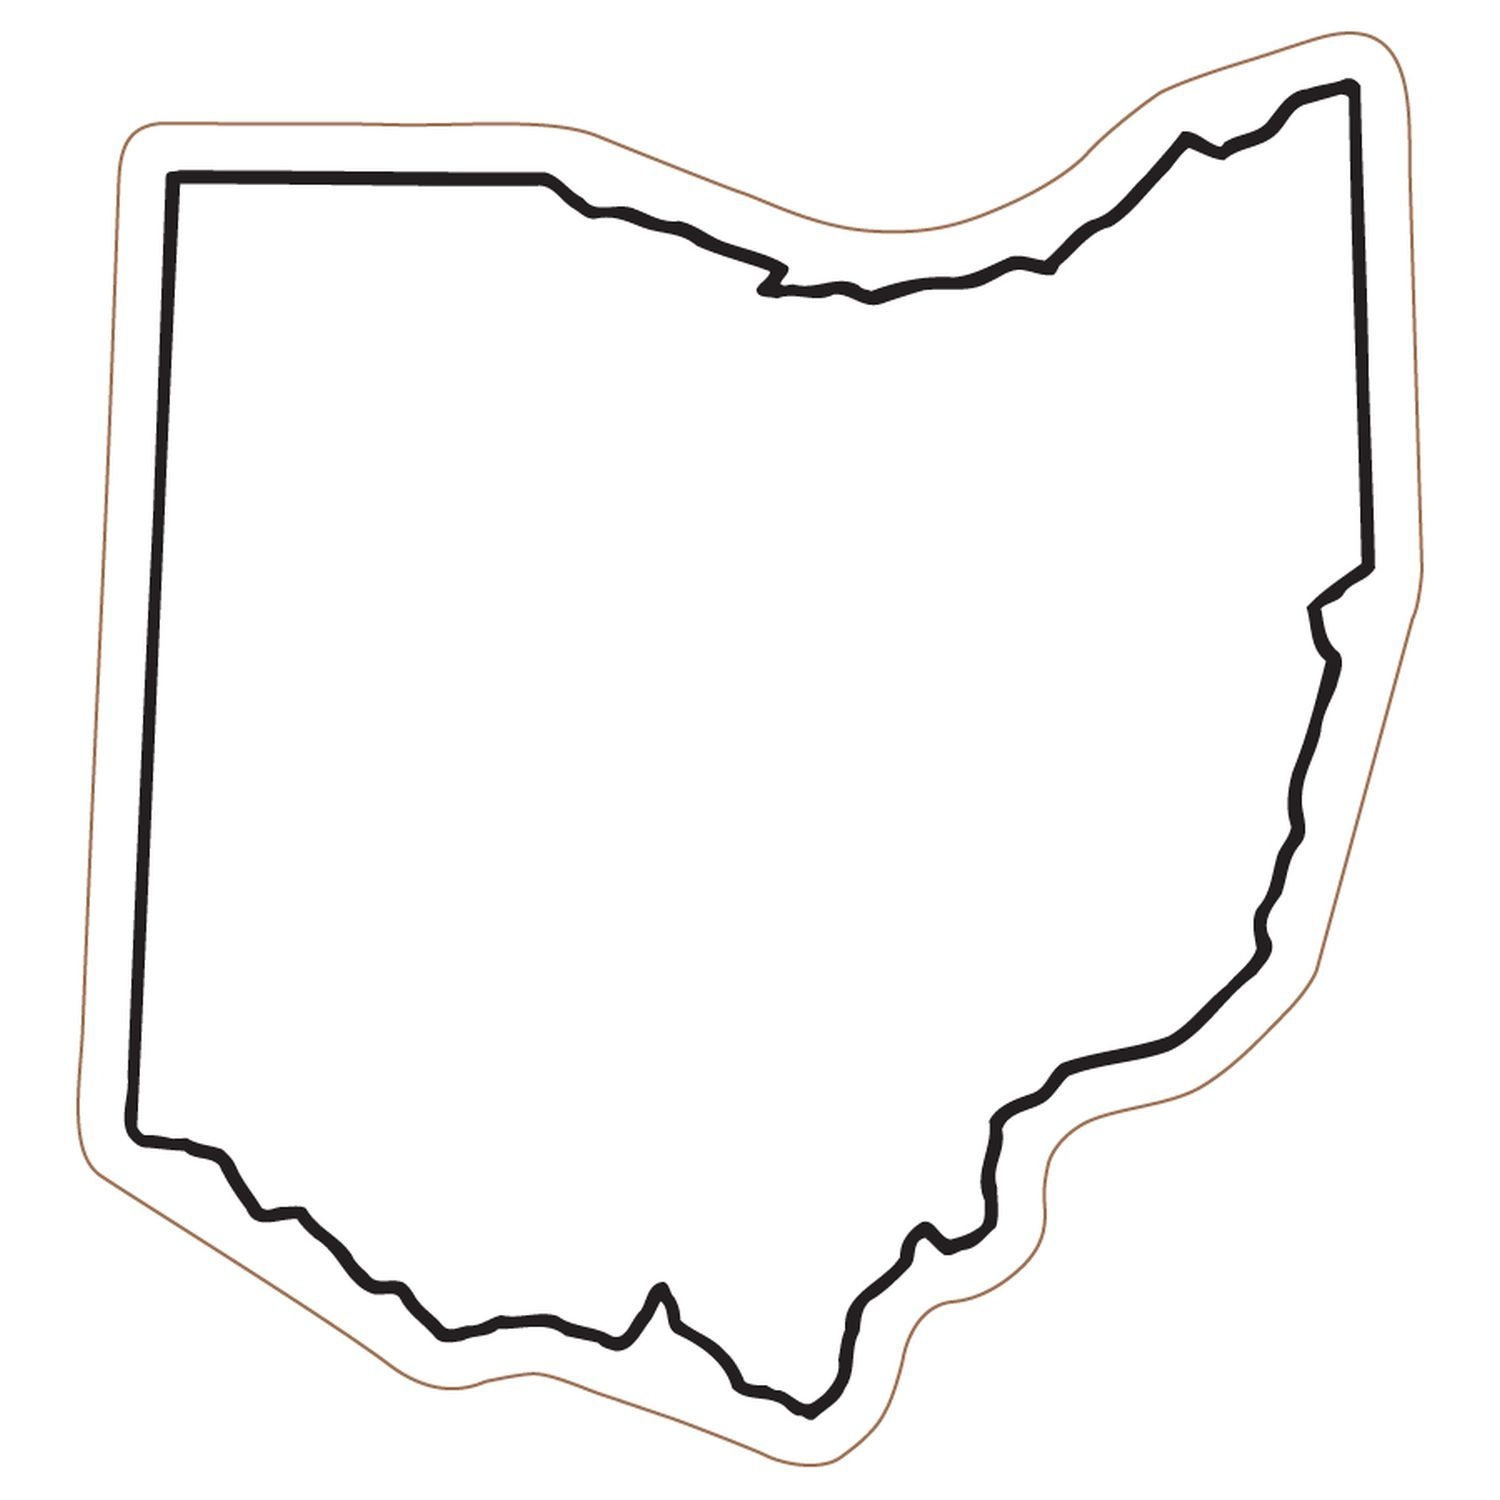 State of ohio outline clip art